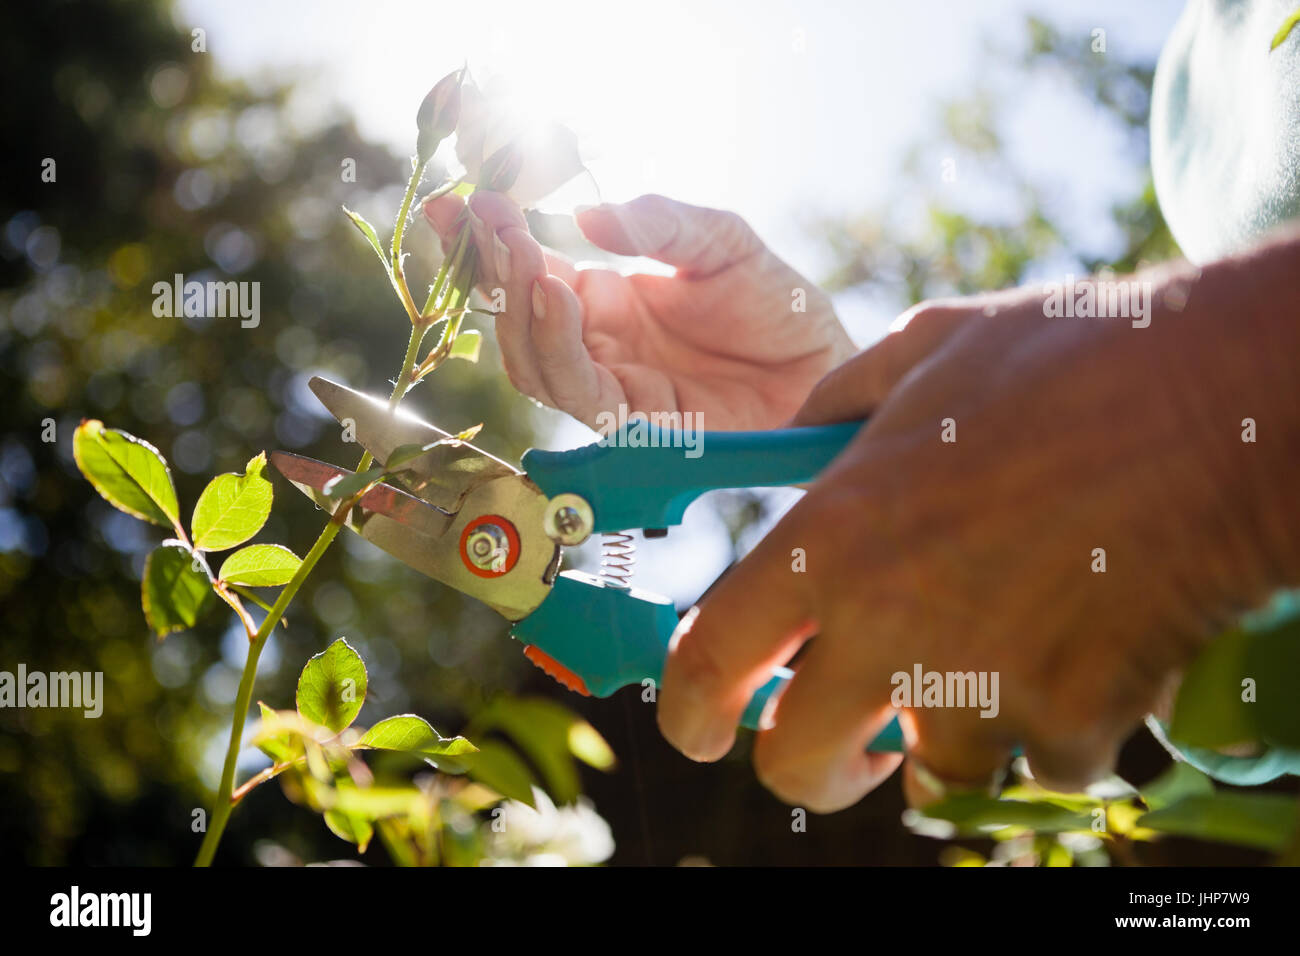 Close-up of senior woman cutting flower stem with pruning shears at backyard Stock Photo